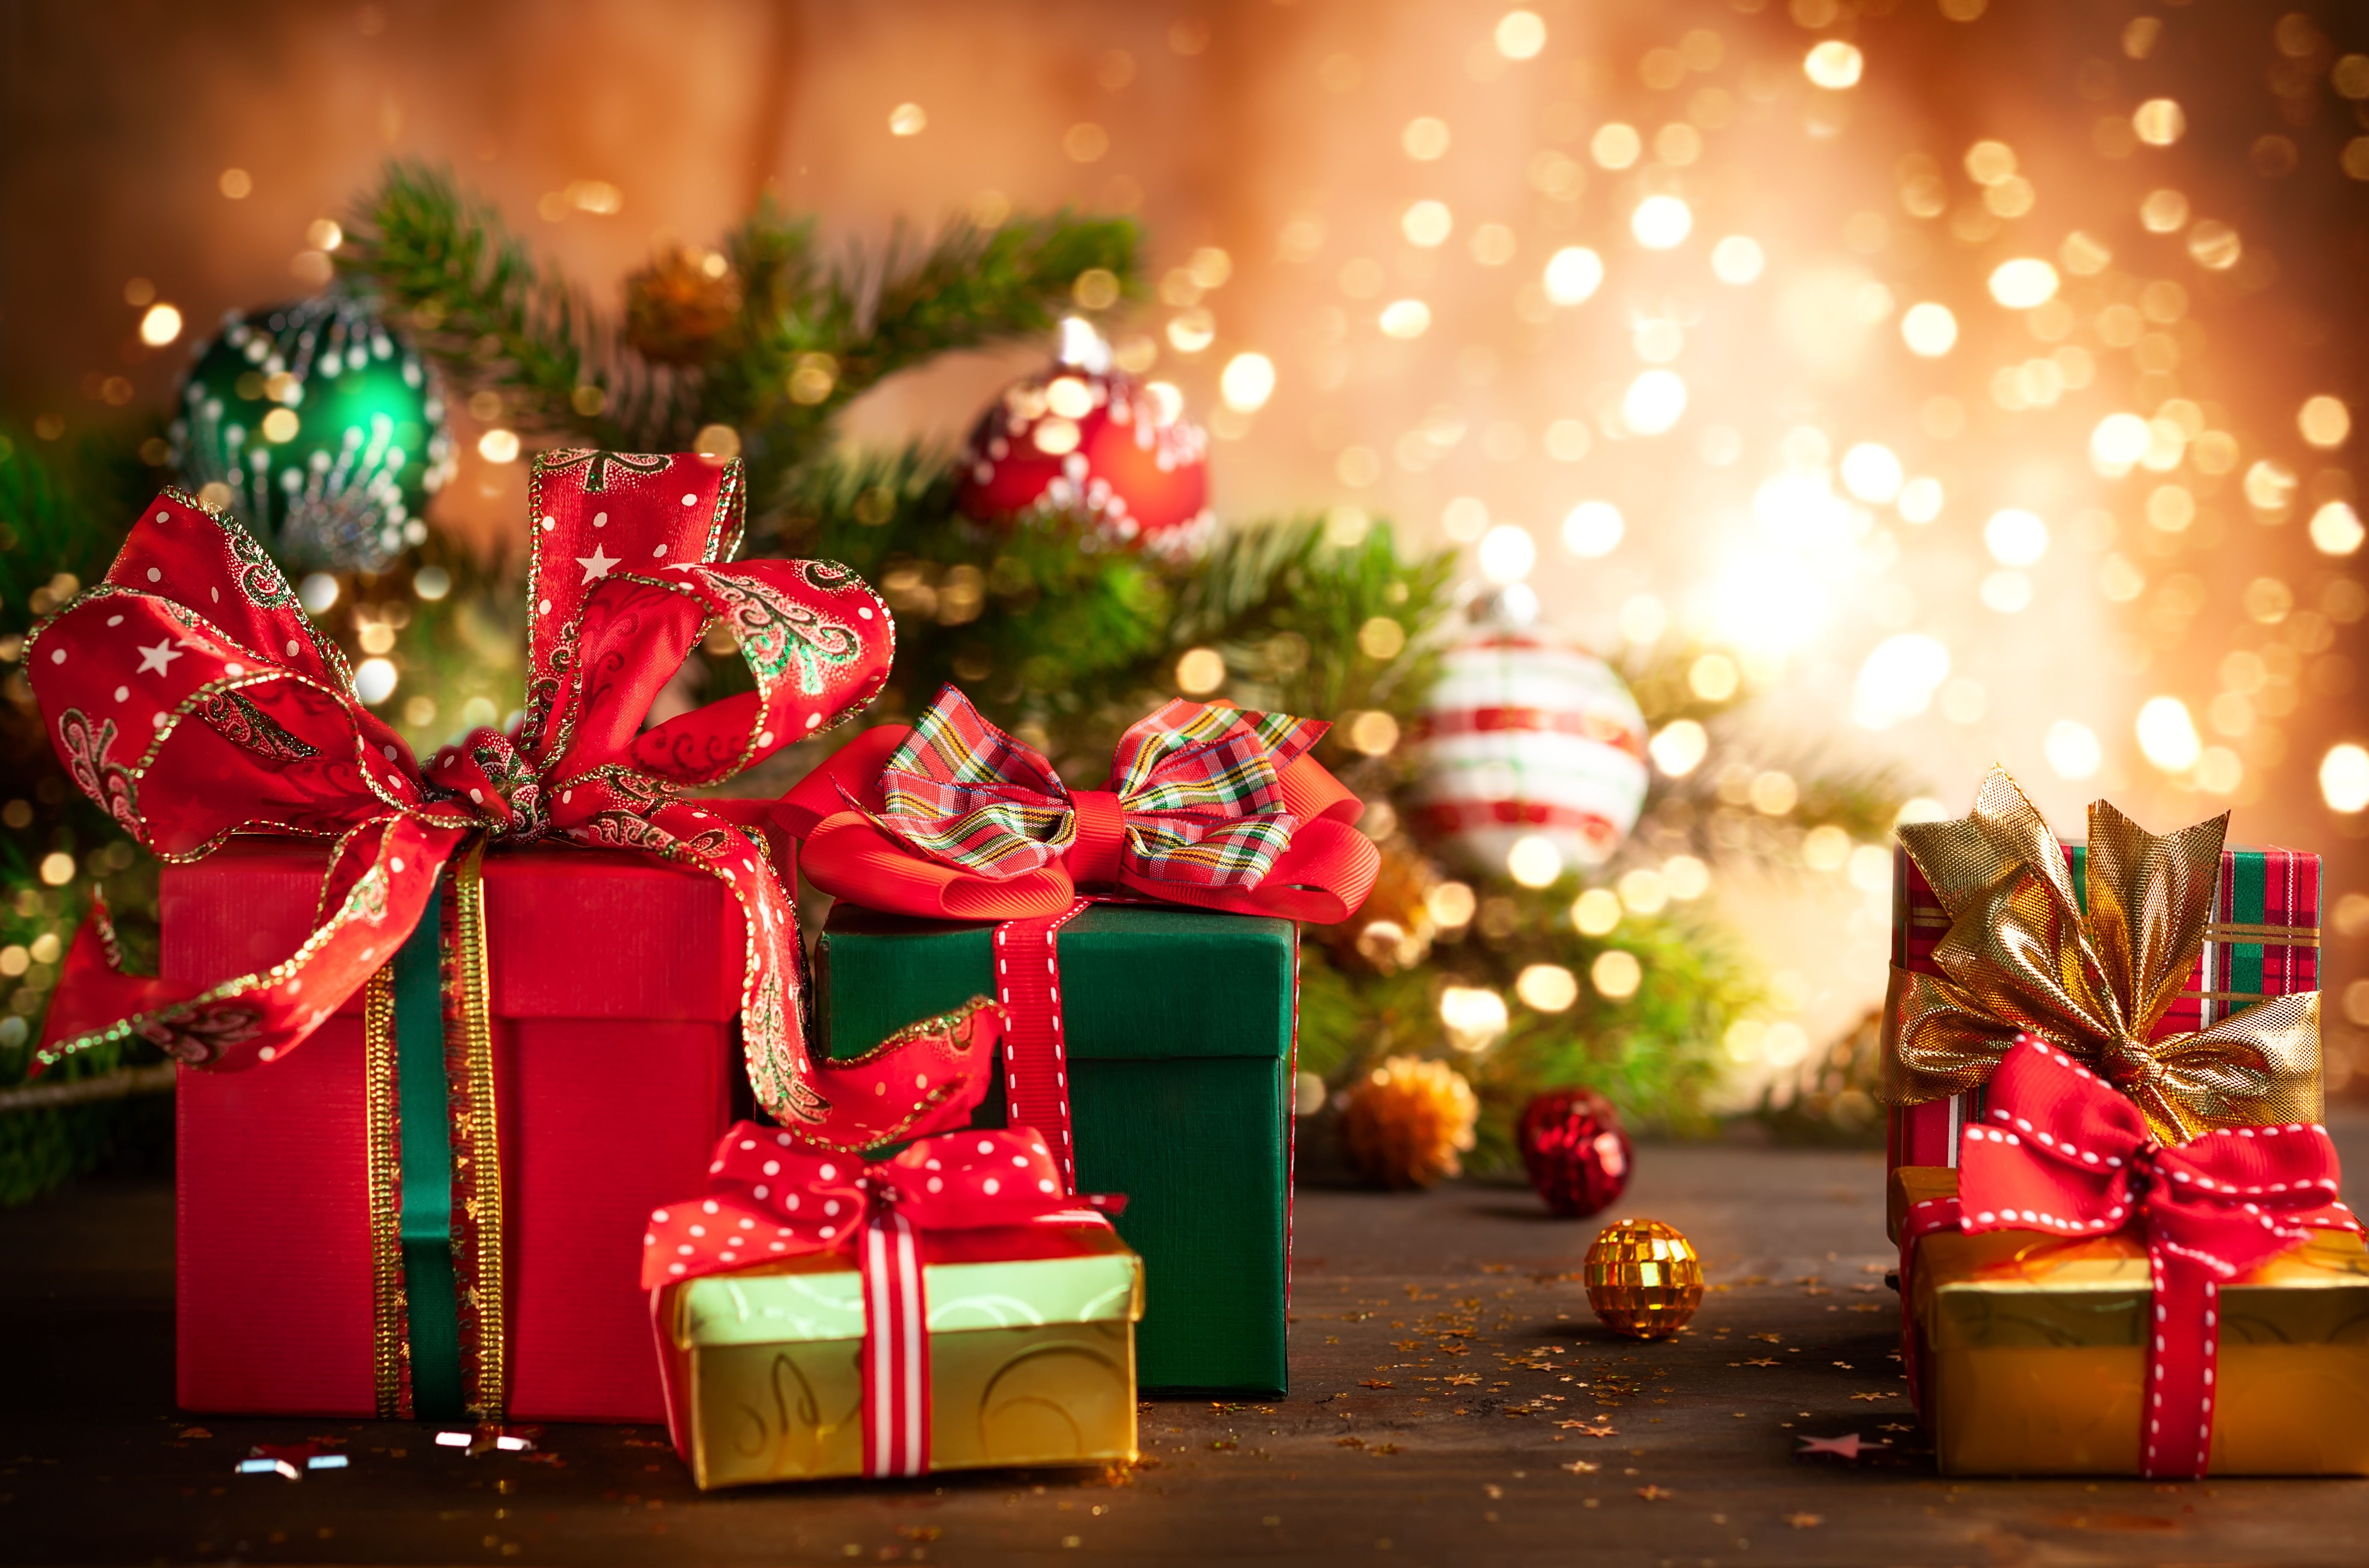 Christmas Gifts Background Image HD